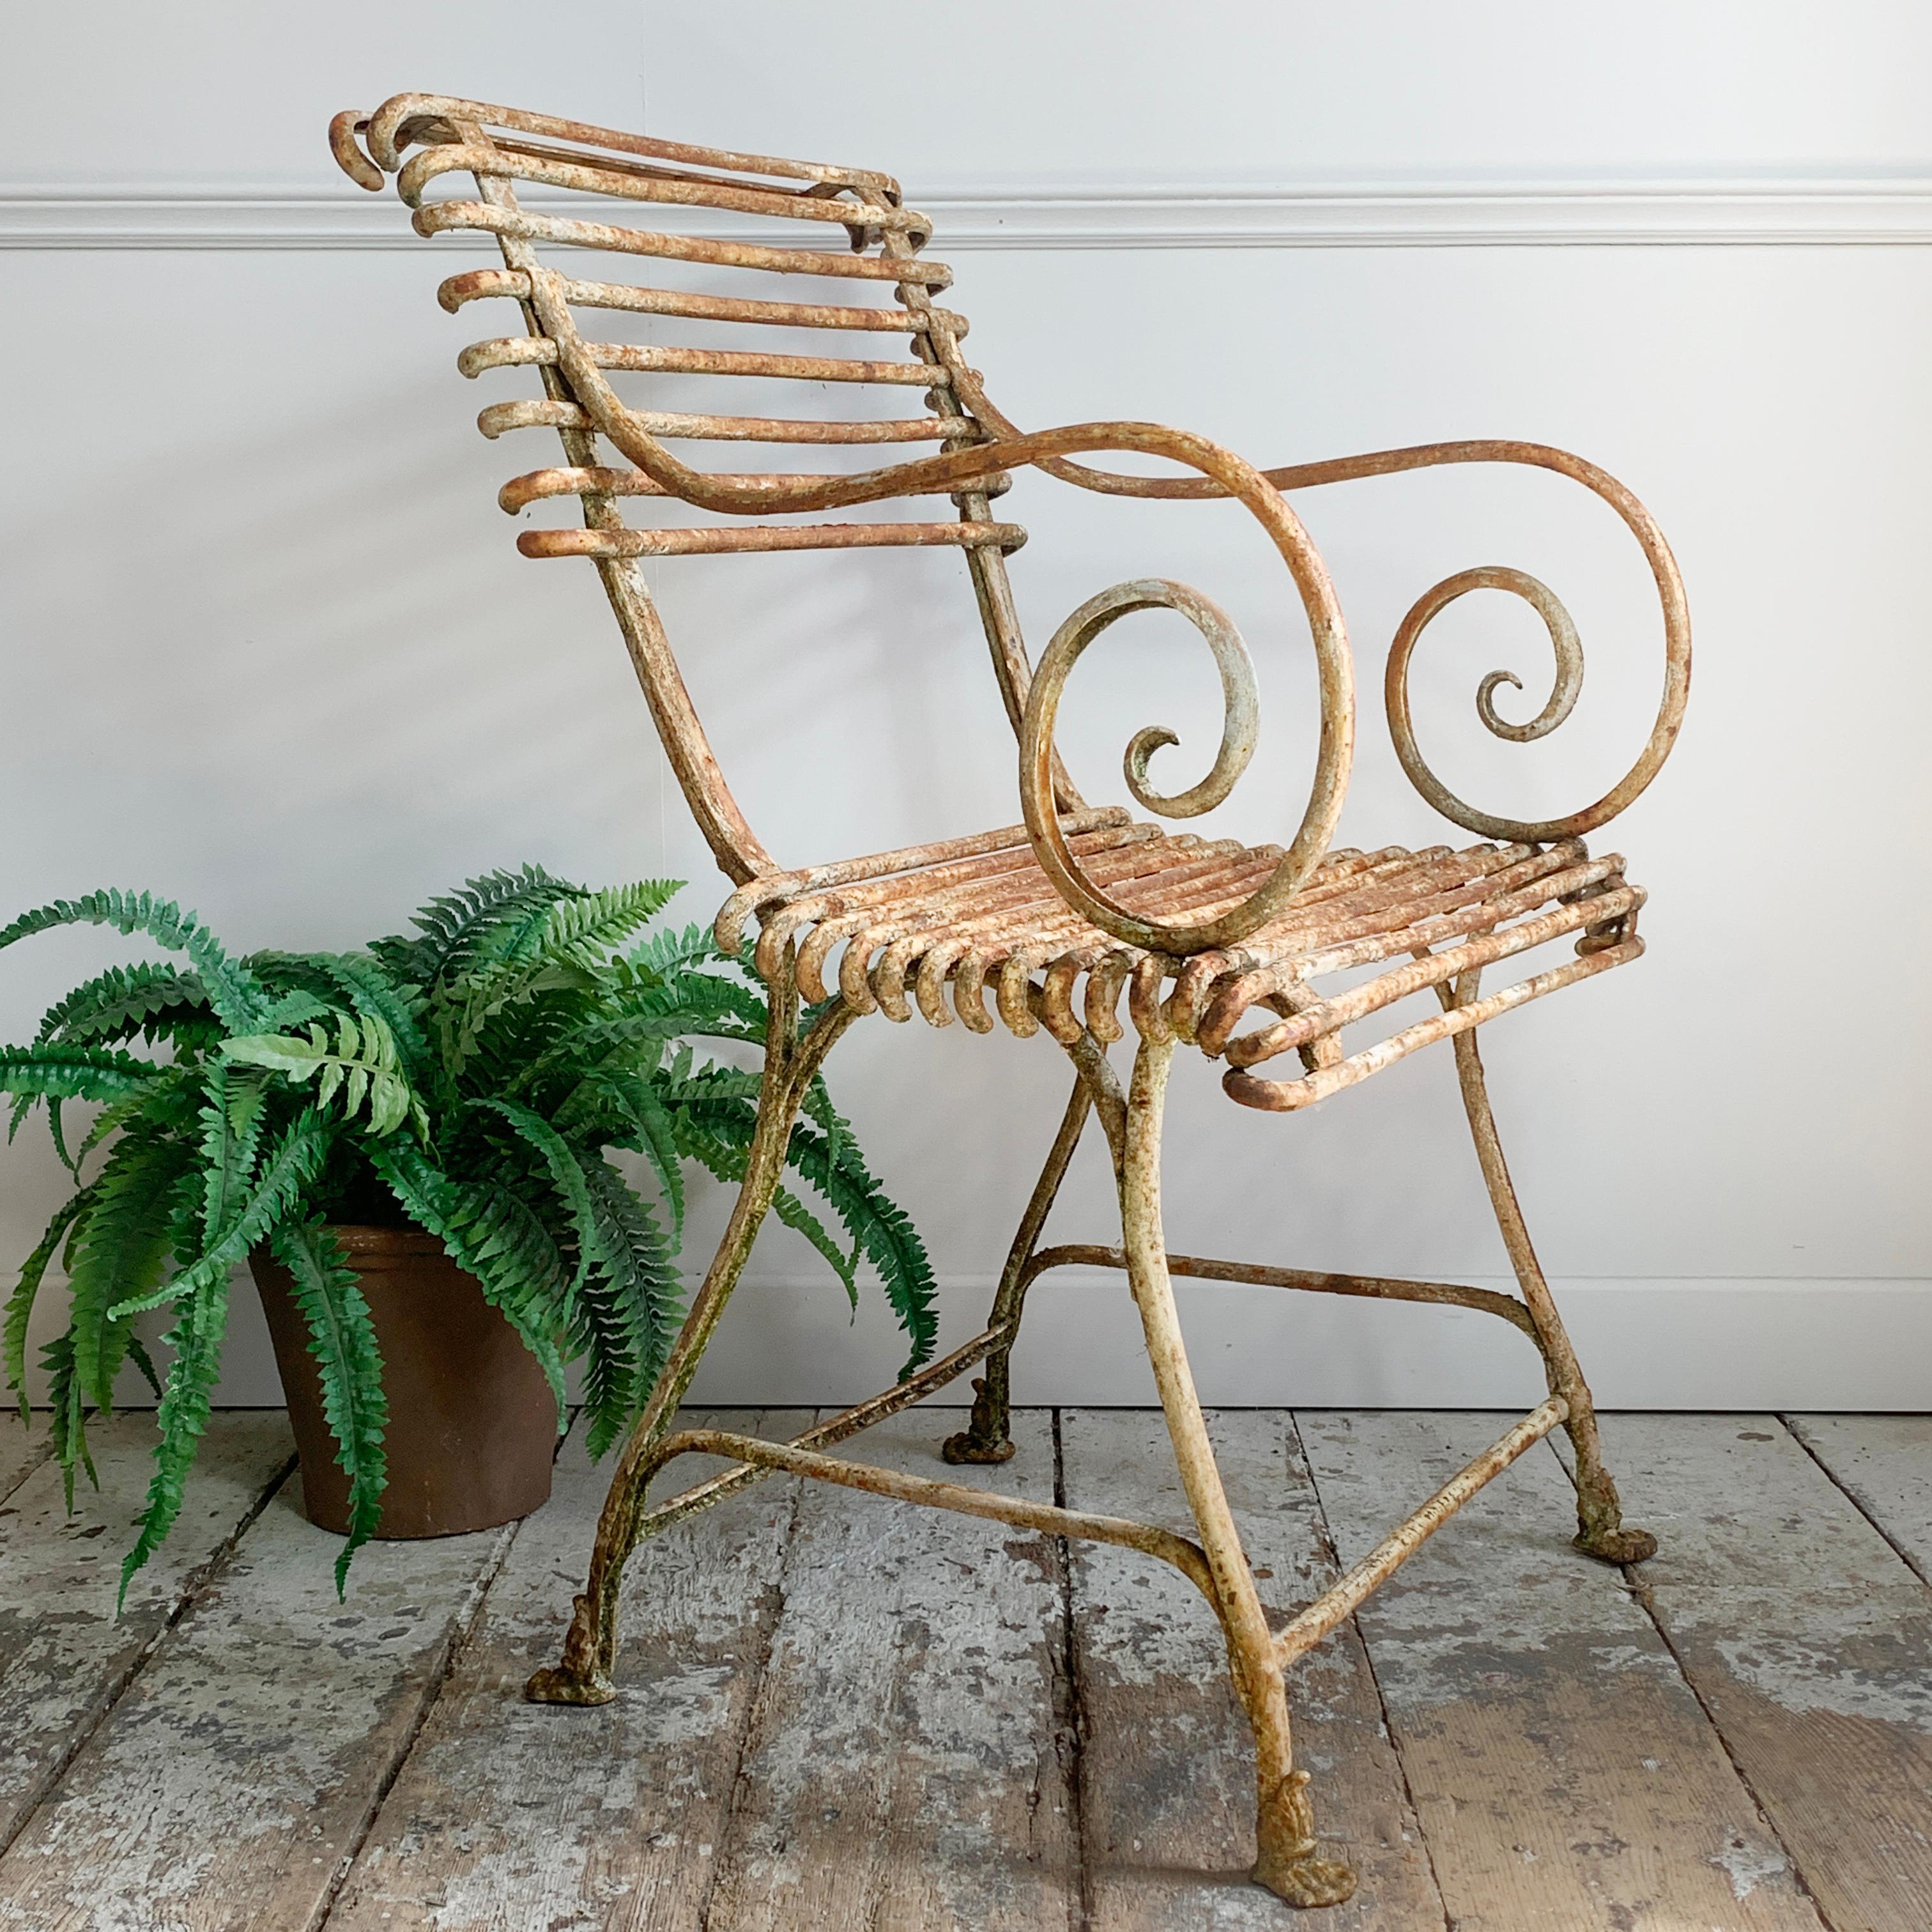 These are the original antique Arras, not to be confused with modern reproductions.

Absolutely beautiful set of three antique Arras iron chair with arms. These are the very early 19th century Lion Paw model, and are much rarer and more desirable